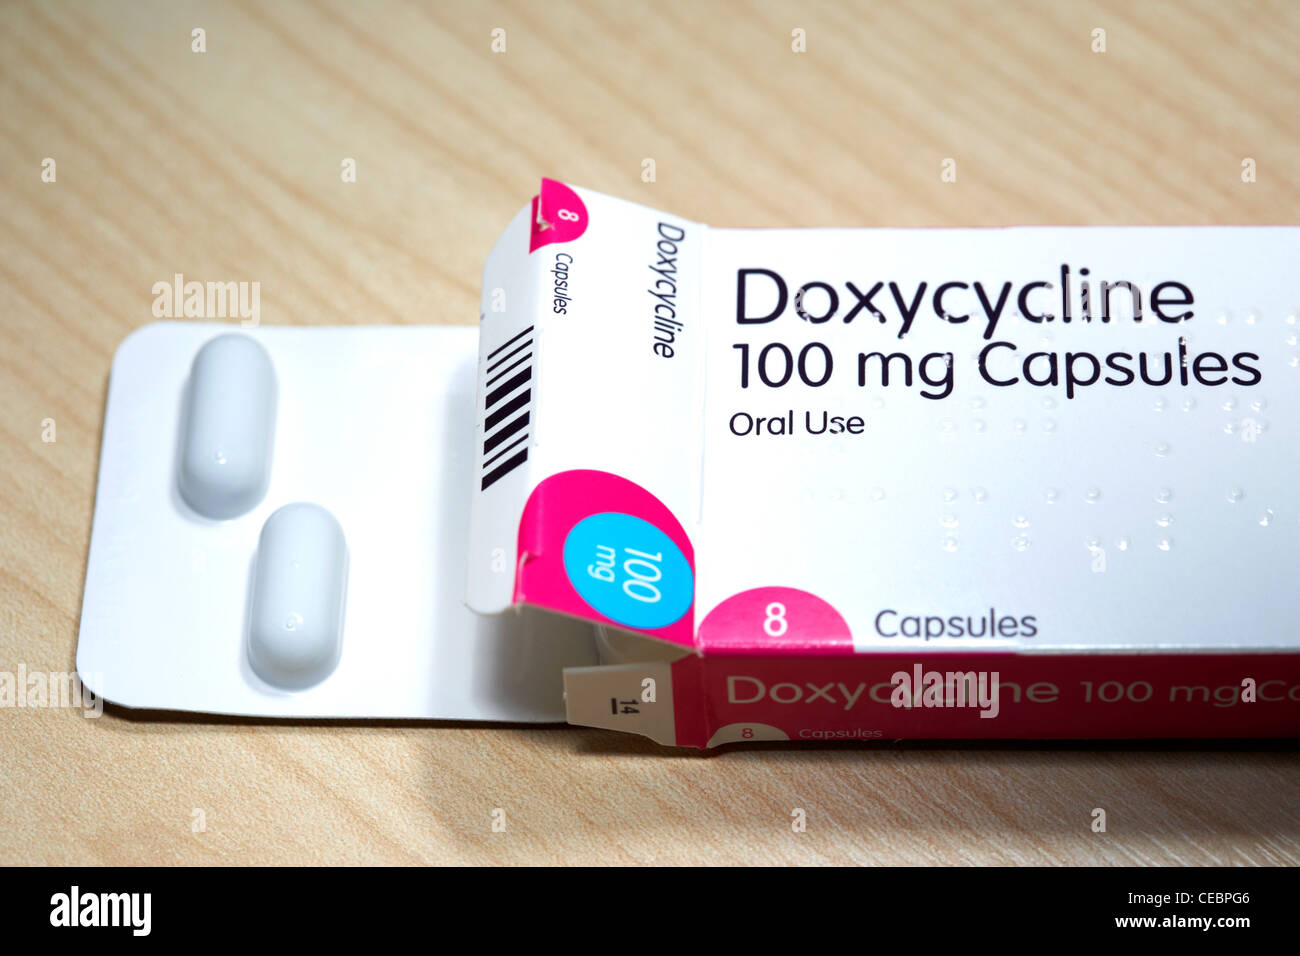 doxycycline 100mg capsules antibiotic in braille encoded box usually prescribed as an anti-malarial or for bacterial infections Stock Photo